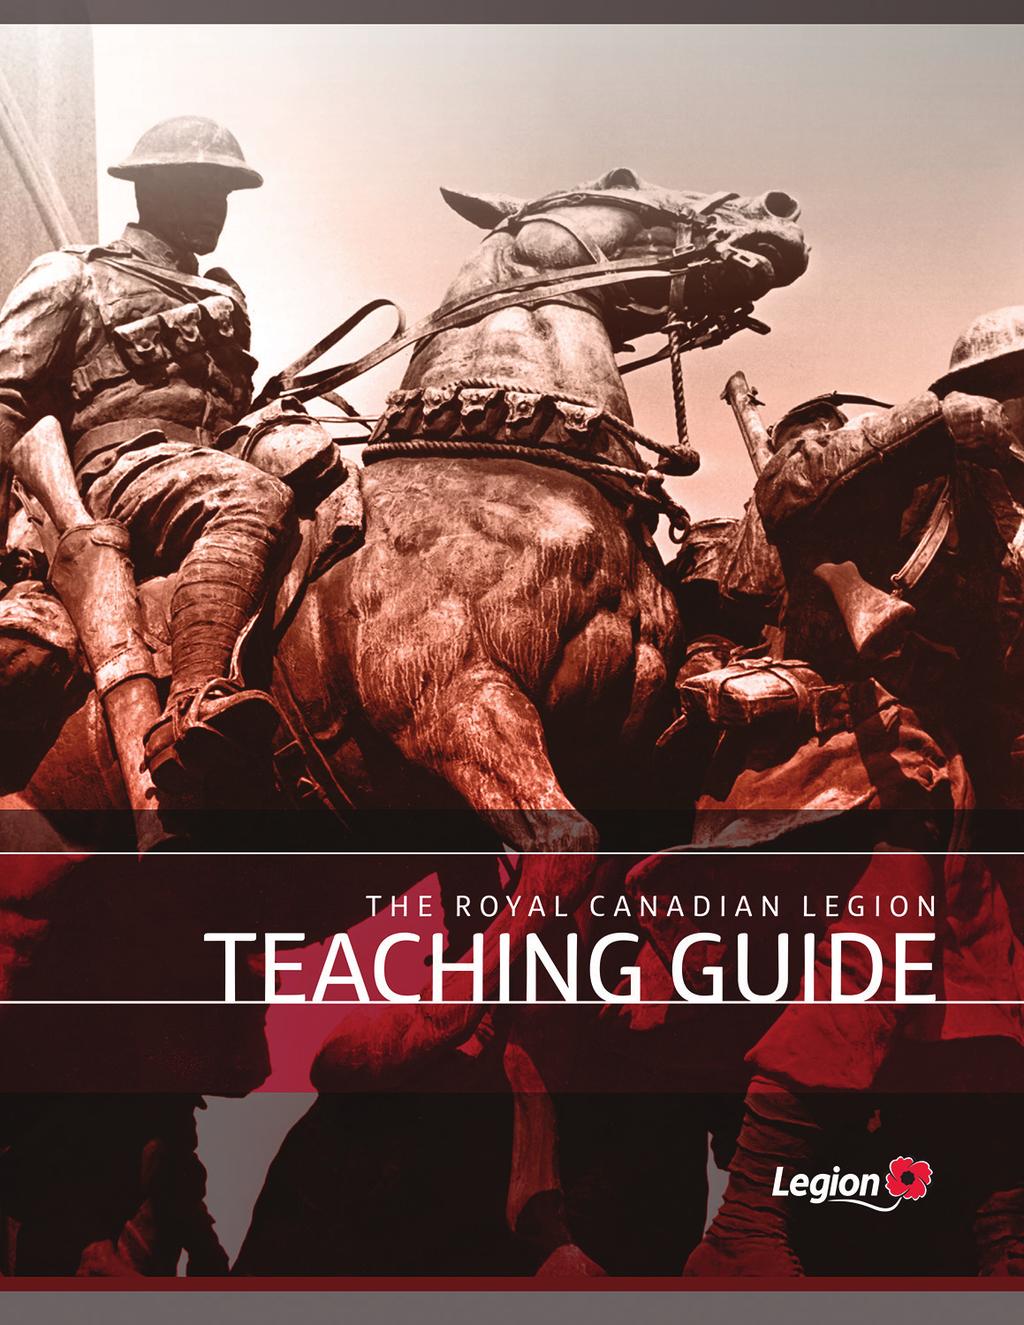 Legion Teaching Guide The Legion Teaching Guide: assists primary and secondary school teachers impart valuable information fosters the tradition of Remembrance amongst Canadian youth includes notes